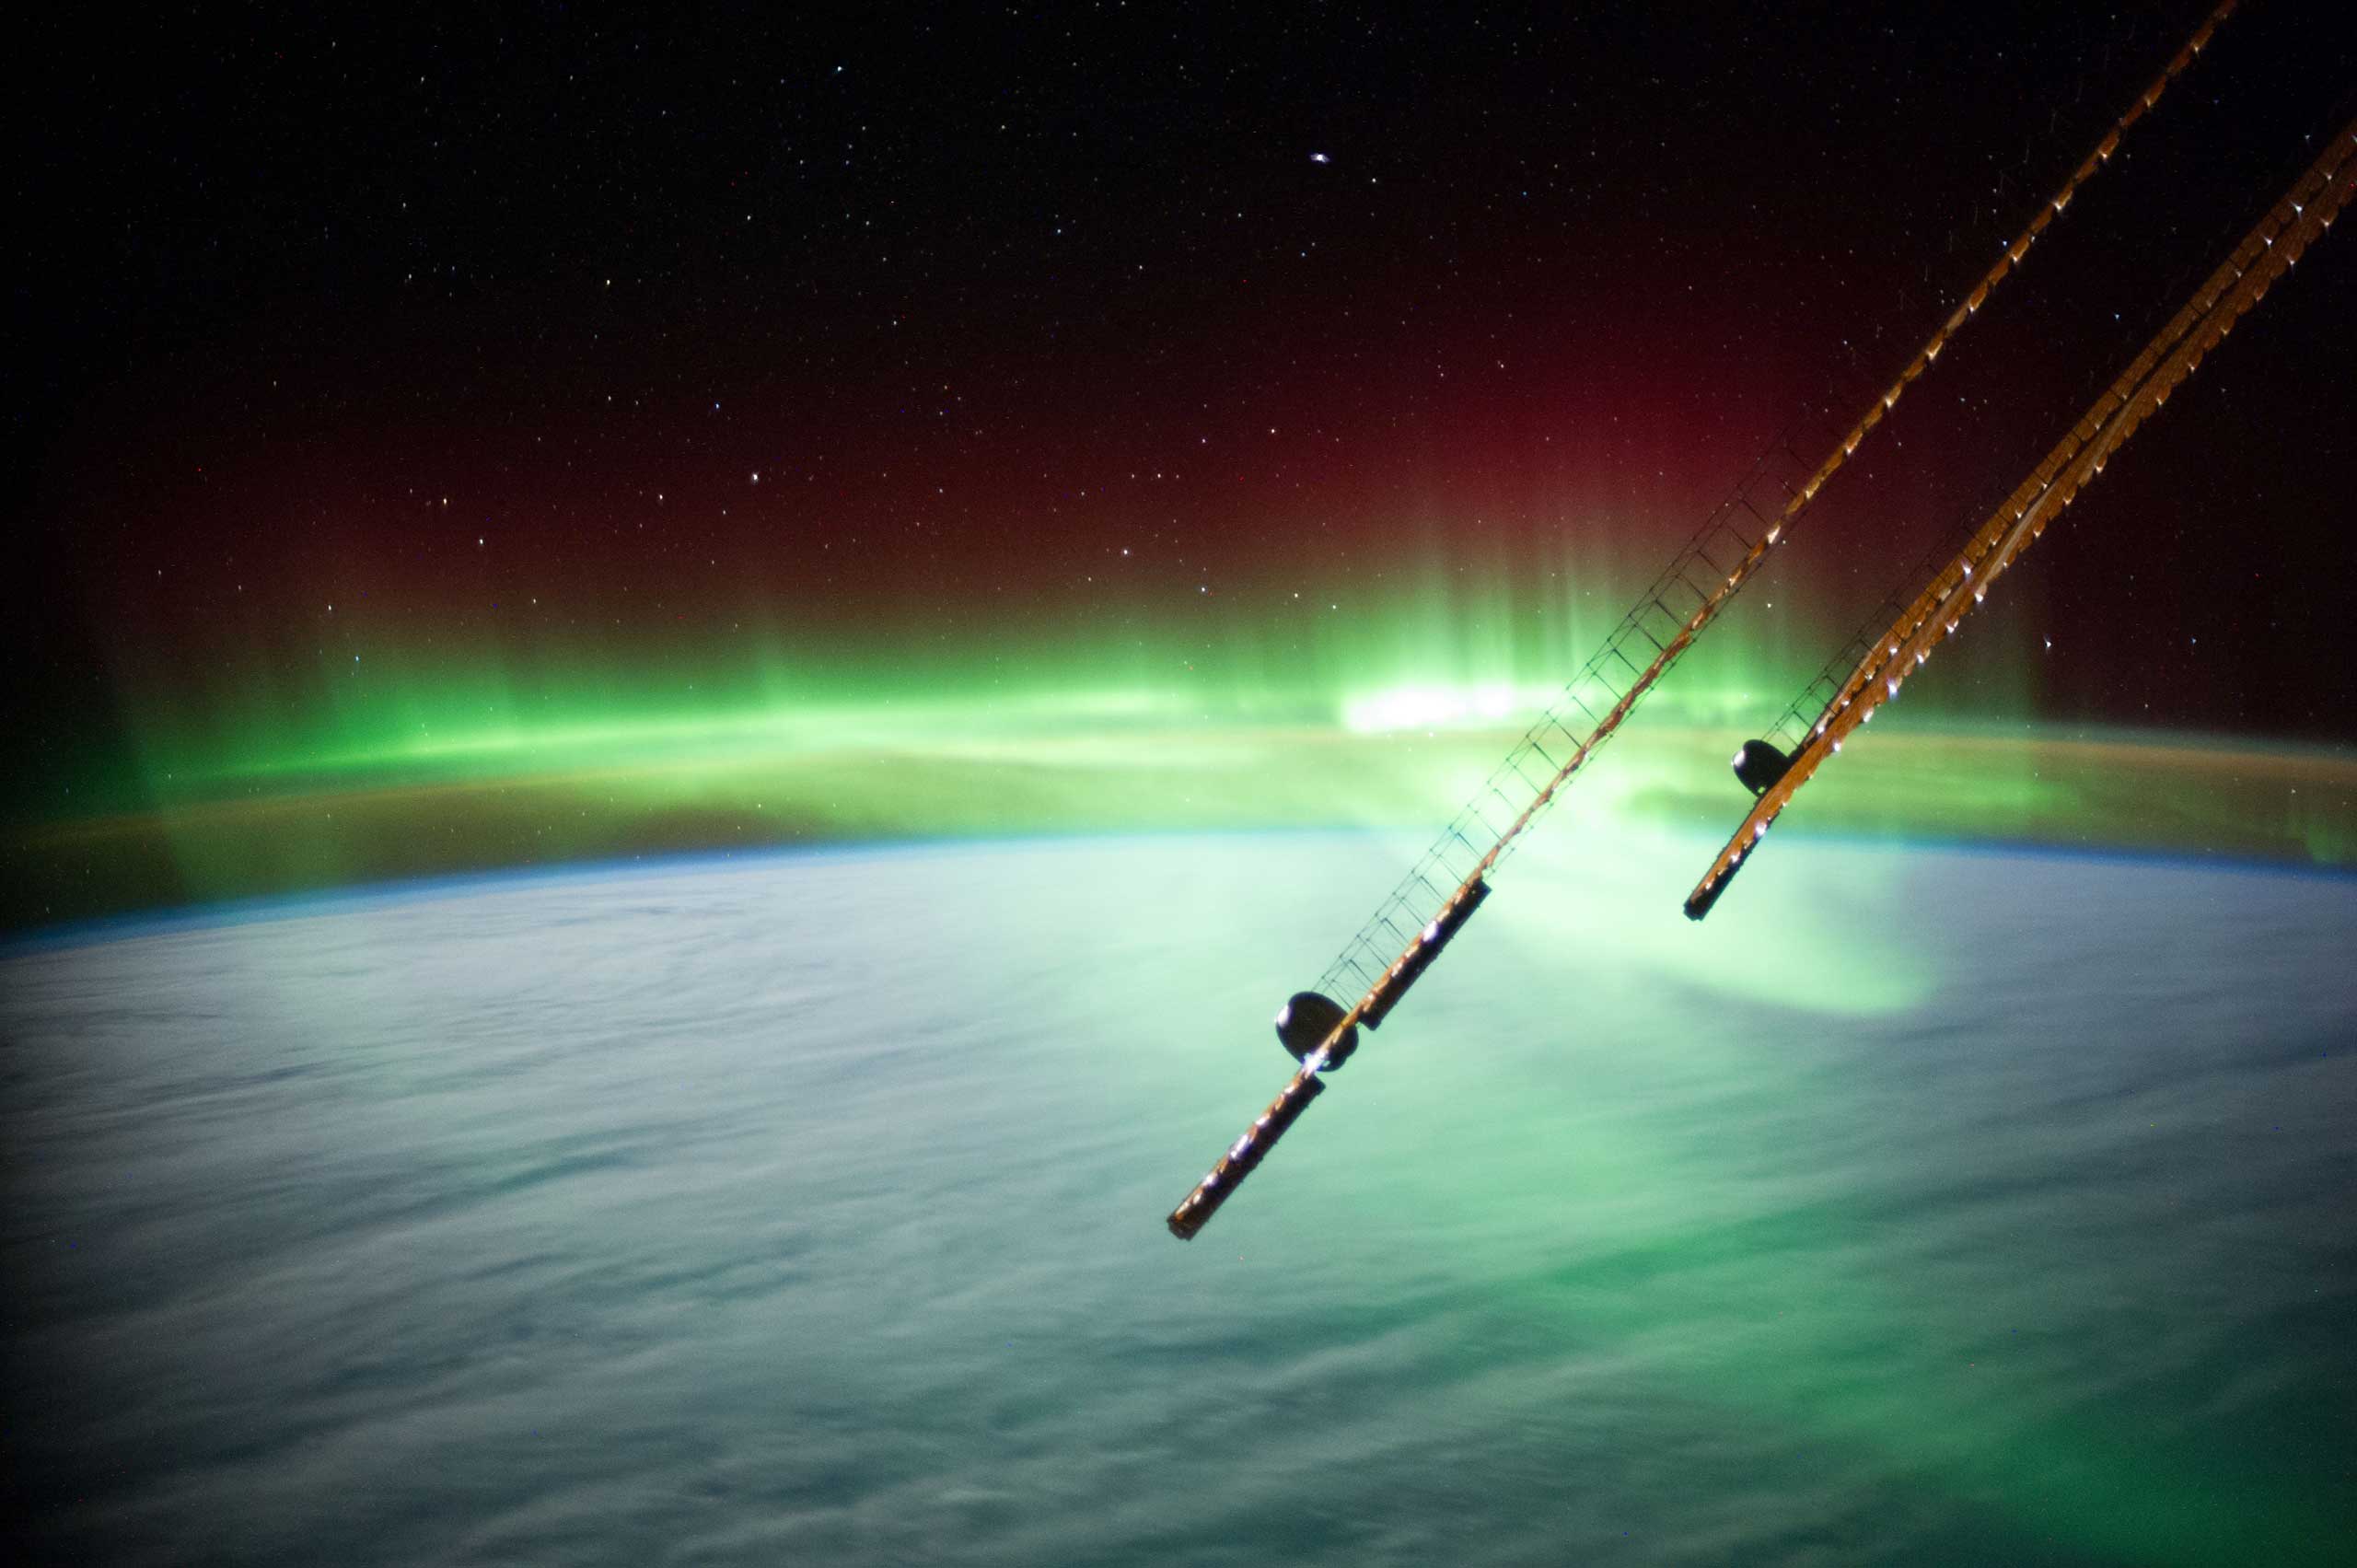 An aurora near Australia seen from the International Space Station released on July 15, 2014.